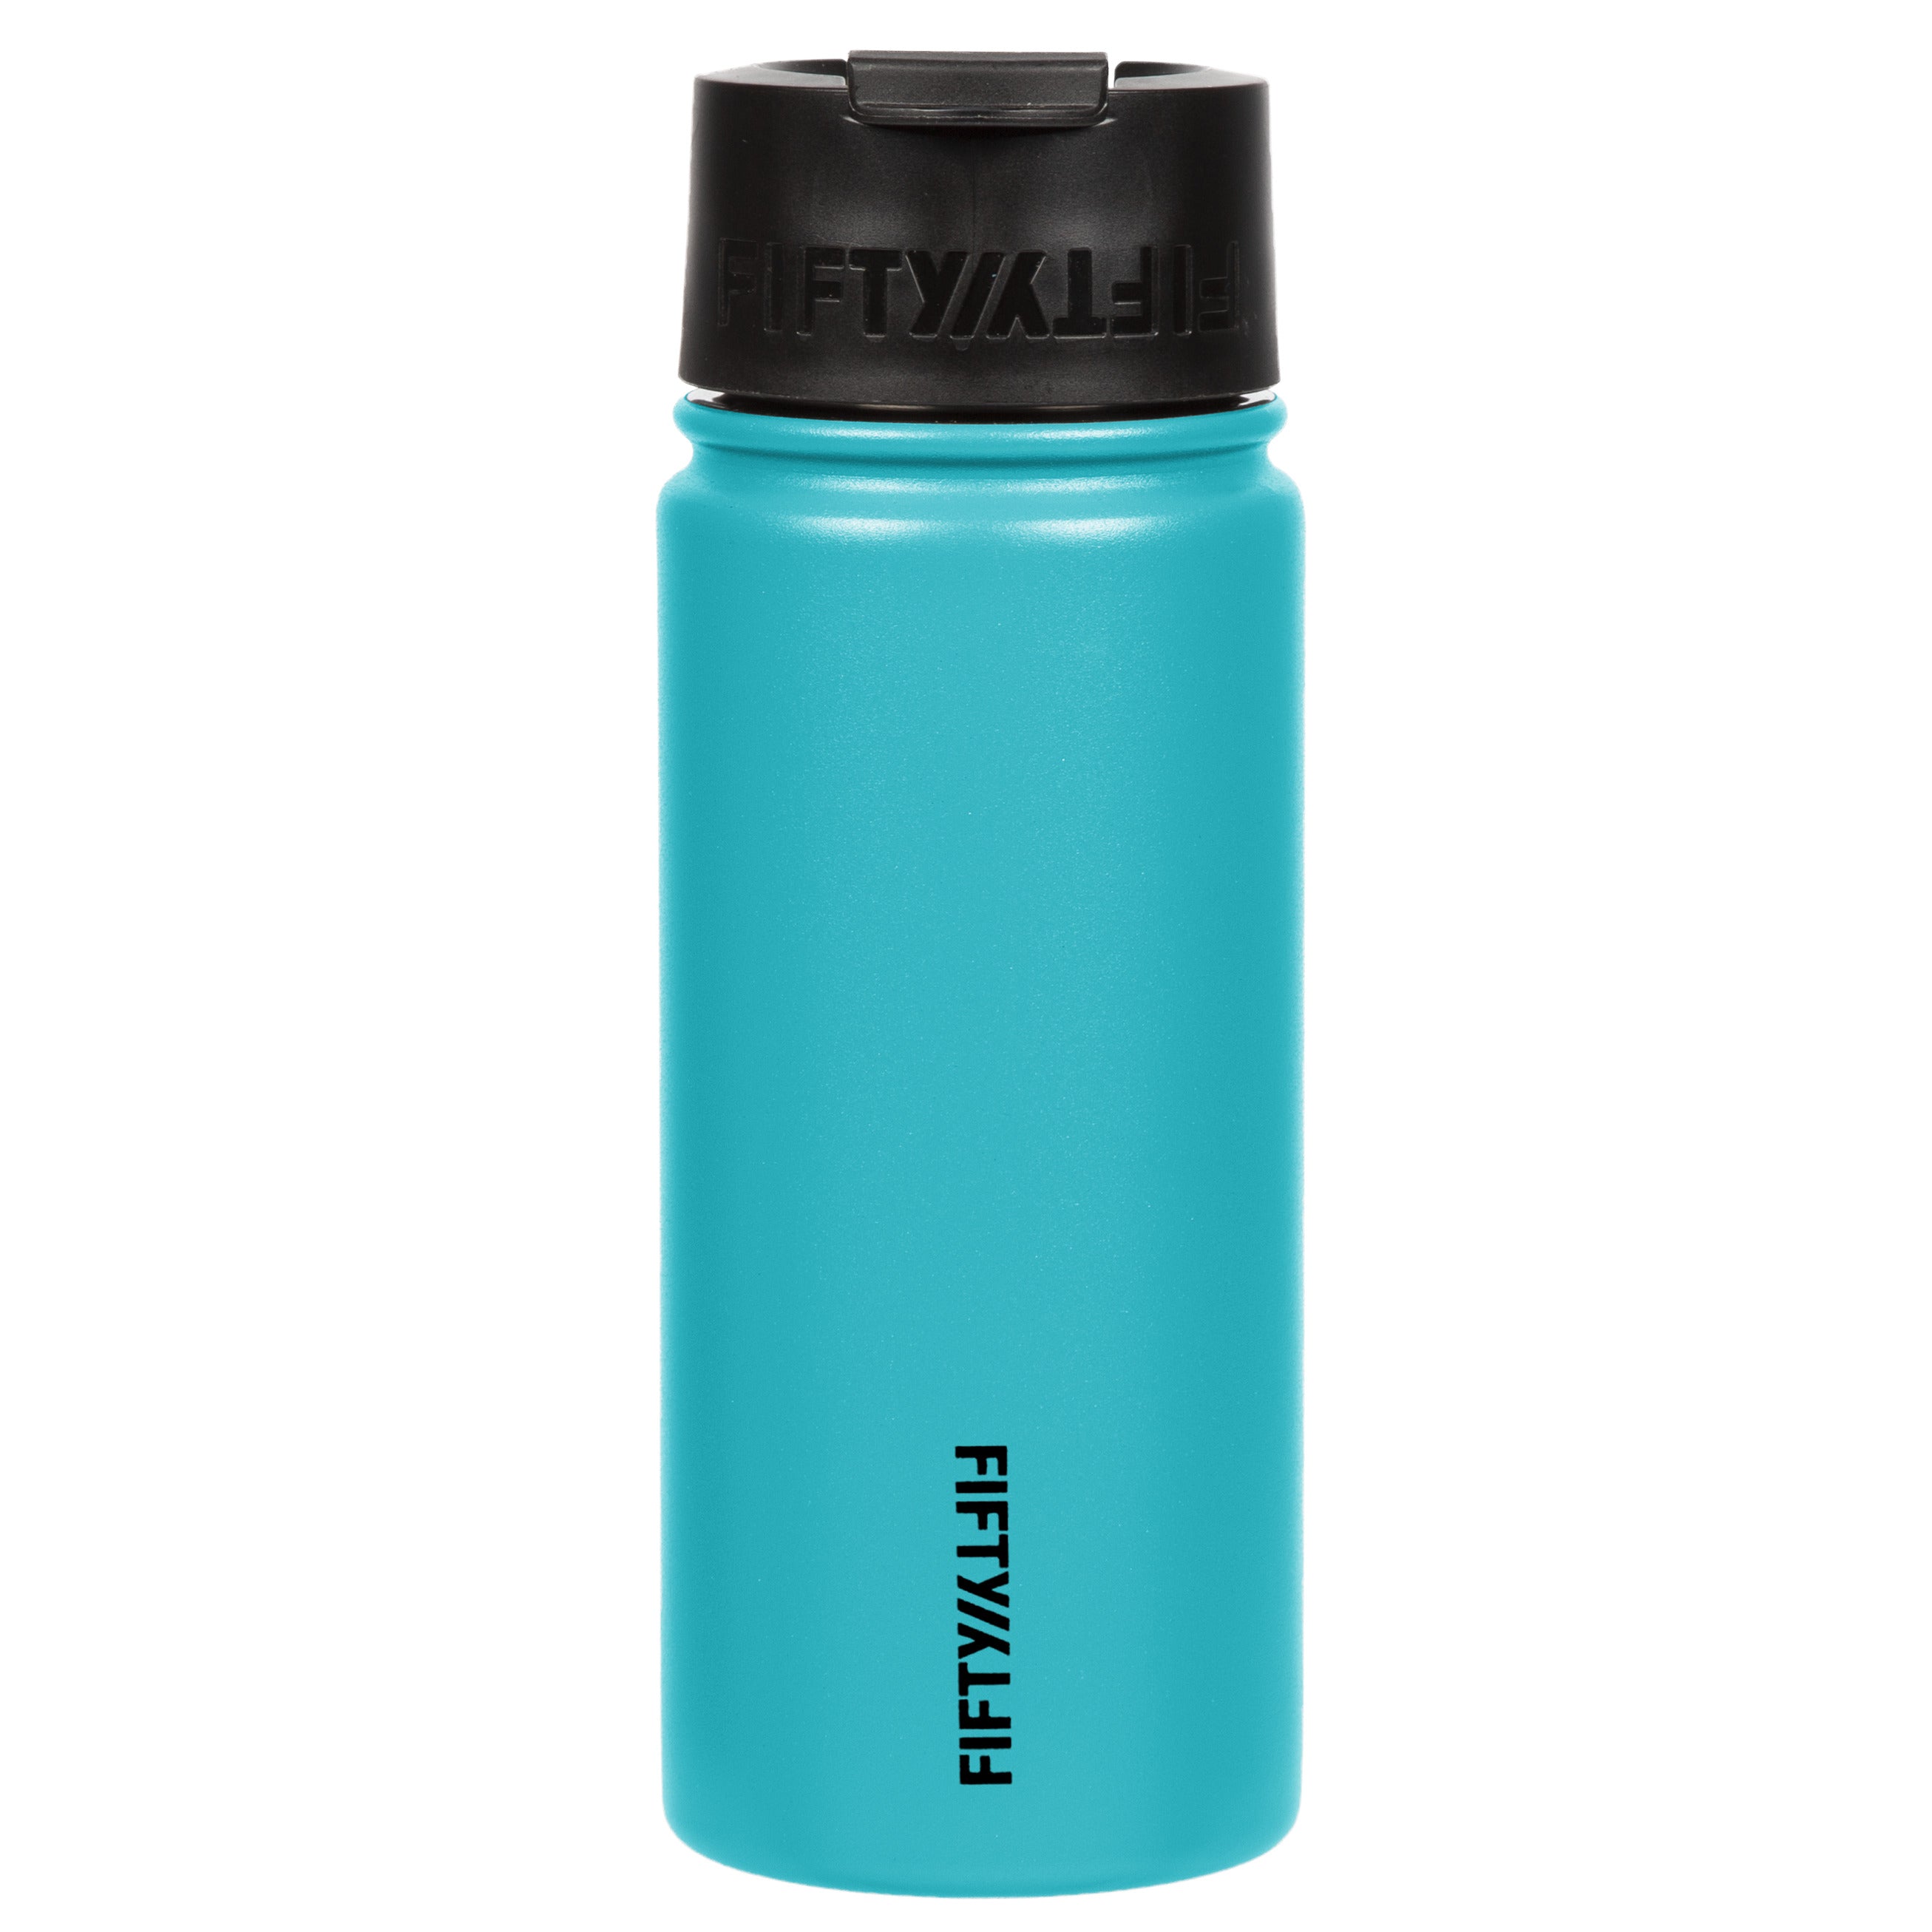 Tasty 16 oz Blue Ombre Plastic Water Bottle with Wide Mouth and Flip-Top Lid